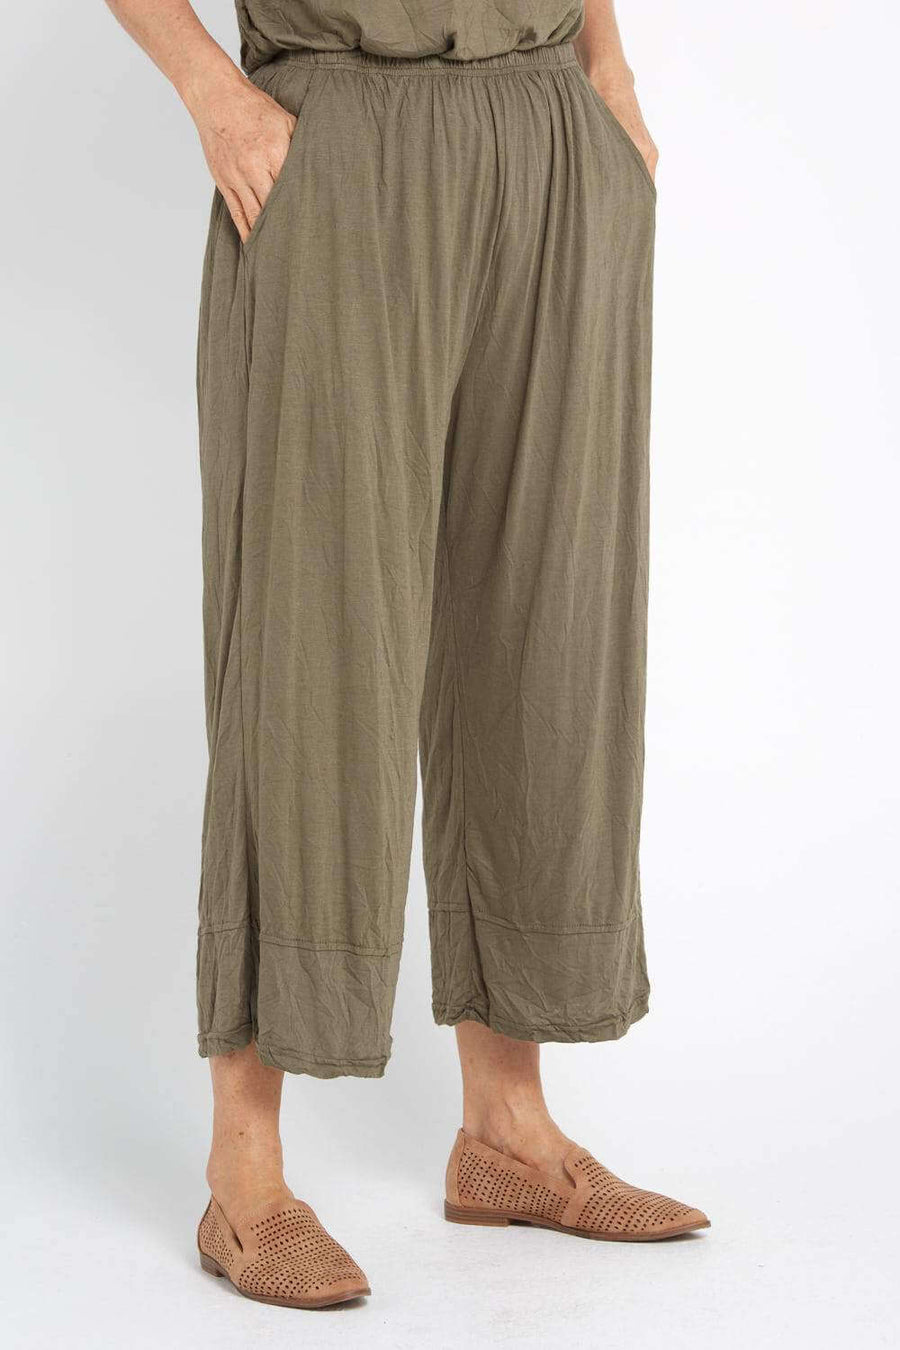 Pants for Mature Women - Purchase Pants for Women Over 40 Online – Tulio